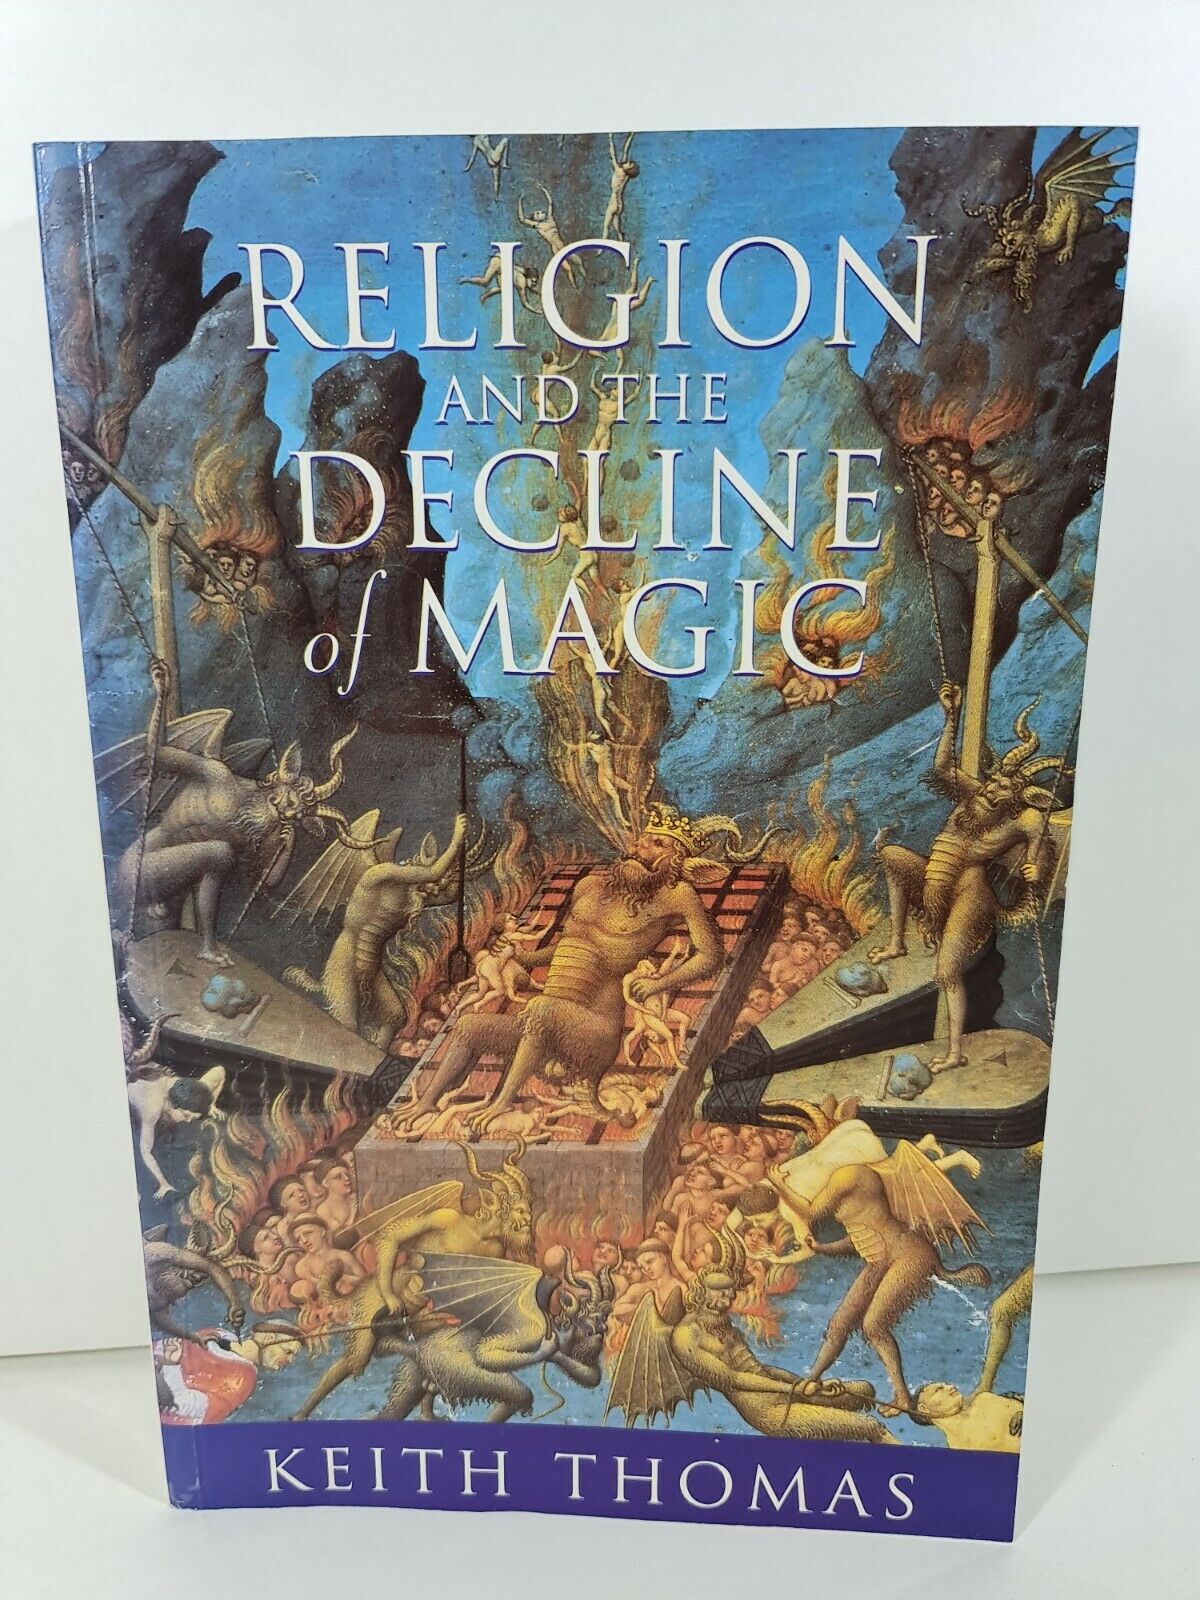 Religion and the Decline of Magic by Keith Thomas